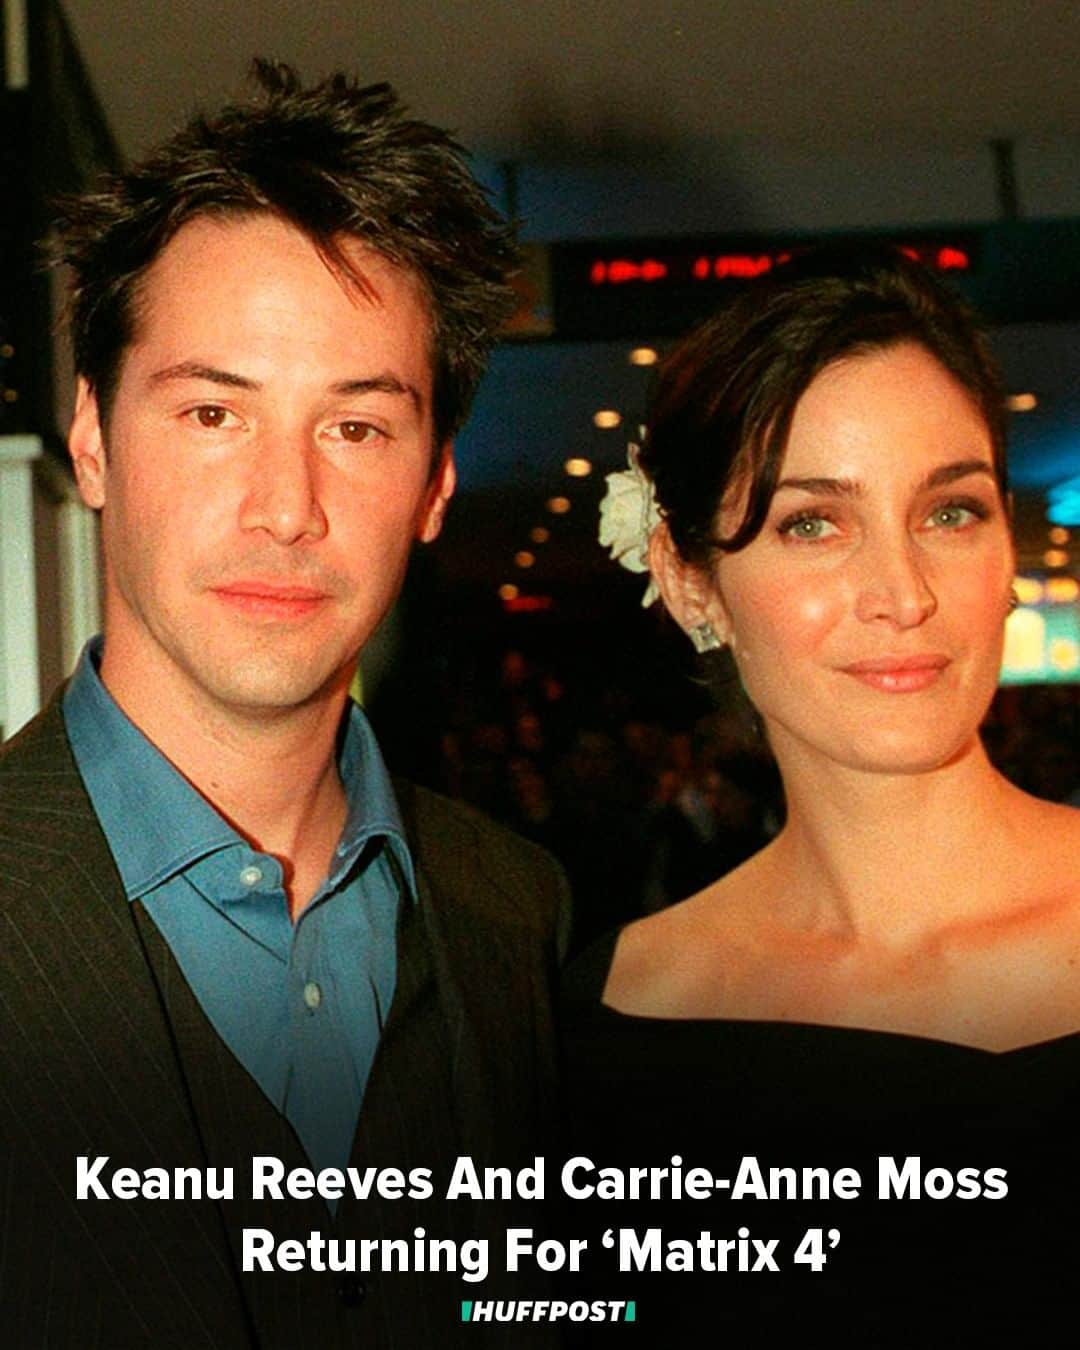 Huffington Postさんのインスタグラム写真 - (Huffington PostInstagram)「Warner Brothers is taking the red pill and plugging back into “The Matrix,” with stars Keanu Reeves and Carrie-Anne Moss reprising their roles for a fourth film in the game-changing action franchise. Lana Wachowski, who helmed the first three films with sister Lilly Wachowski, is set to write and direct the sequel that will apparently continue the bullet-dodging adventures of leather aficionados Neo and Trinity, according to Variety. “Many of the ideas Lilly and I explored 20 years ago about our reality are even more relevant now. I’m very happy to have these characters back in my life and grateful for another chance to work with my brilliant friends,” Wachowski told the outlet in a statement. Screenwriters Aleksandar Hemon and David Mitchell will produce the script alongside Lana Wachowski. The film will reportedly begin production in the beginning of 2020, more than two decades after the first film hit theaters and spawned two sequels, “The Matrix Reloaded” (2003) and “The Matrix Revolutions” (2003). The franchise grossed more than $1.6 billion at the global box office and changed the course of action cinema with its cutting-edge stunt work and special effects. “We could not be more excited to be re-entering the Matrix with Lana,” Warner Bros. Picture Group chairman Toby Emmerich told Variety in a statement. “Lana is a true visionary — a singular and original creative filmmaker — and we are thrilled that she is writing, directing and producing this new chapter in ‘The Matrix’ universe.” Reeves, who’s in the midst of a cultural renaissance — or Reevesisance — with films like “John Wick: Chapter 3” and “Toy Story 4,” hinted that he would be interested in returning only with the Wachowskis at the helm. “They would have to write it and direct it. And then we’d see what the story is, but yeah, I dunno, that’d be weird, but why not?” he told Yahoo back in 2017. He added: “People die, stories don’t. People in stories don’t.” // 📸: Getty Images」8月22日 2時10分 - huffpost